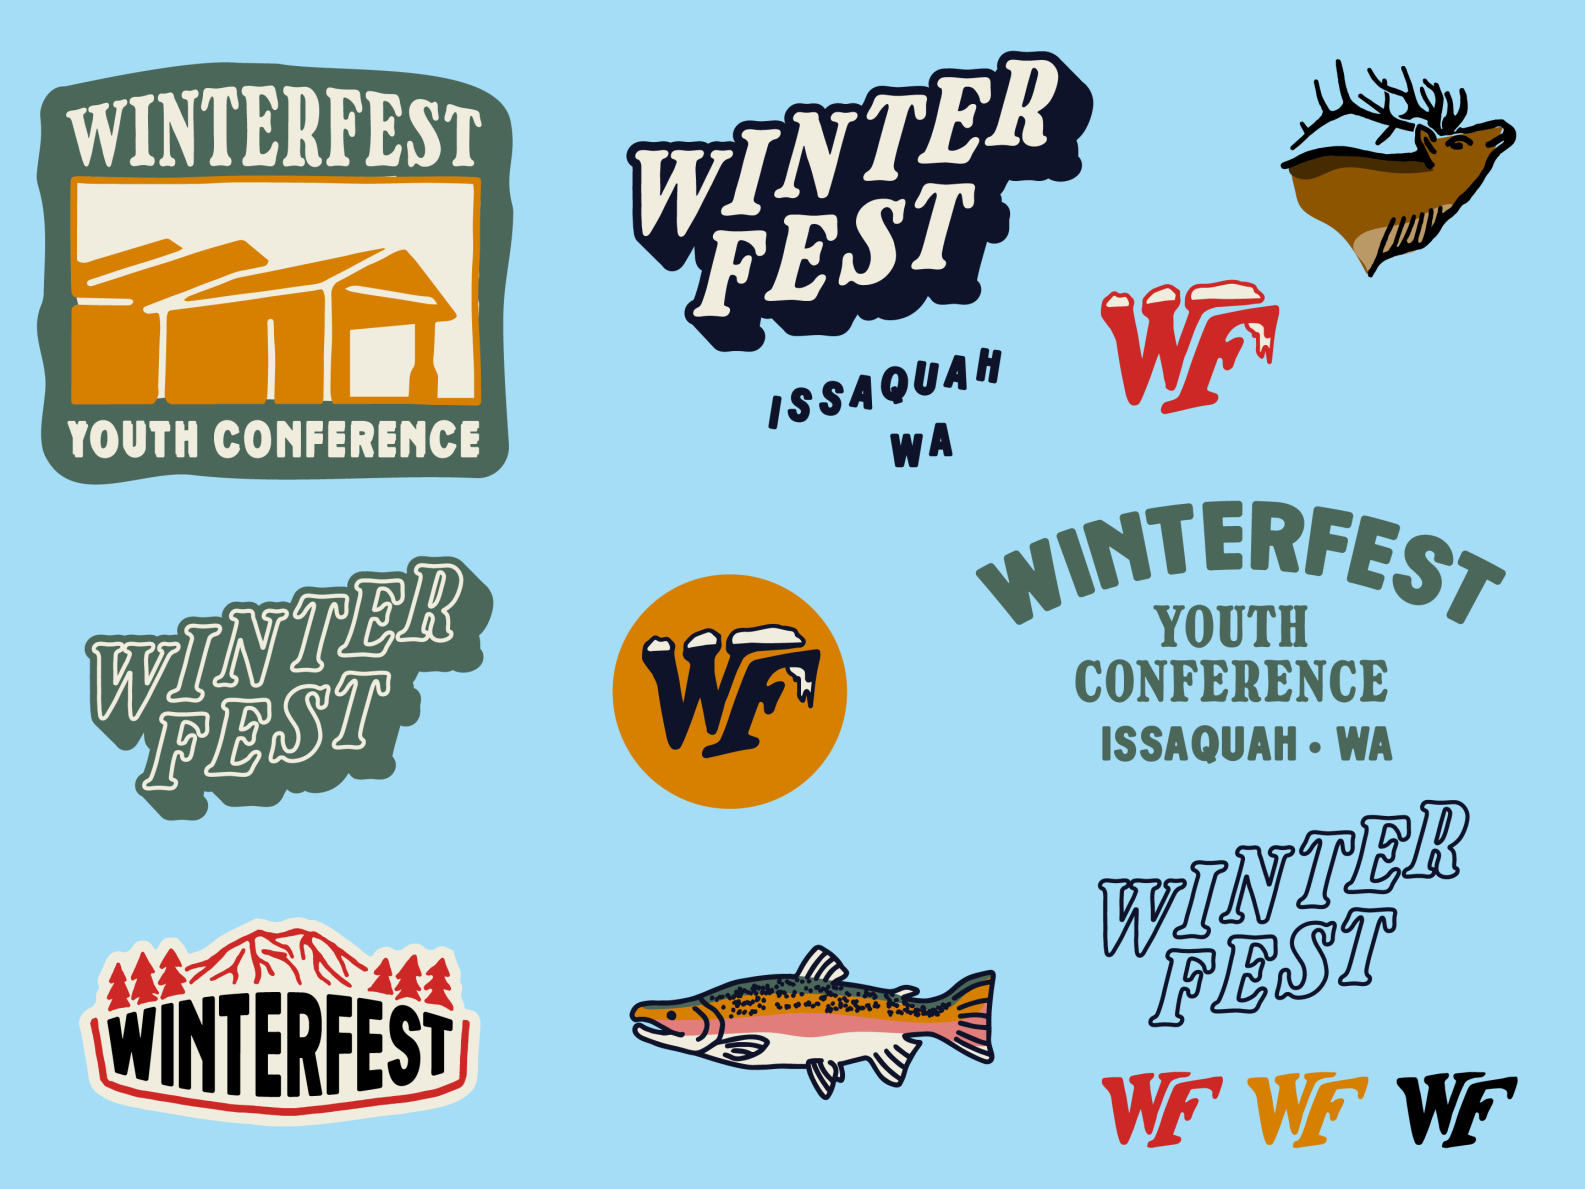 Winterfest Youth Conference by Bright Coal (Josh Whiting) on Dribbble